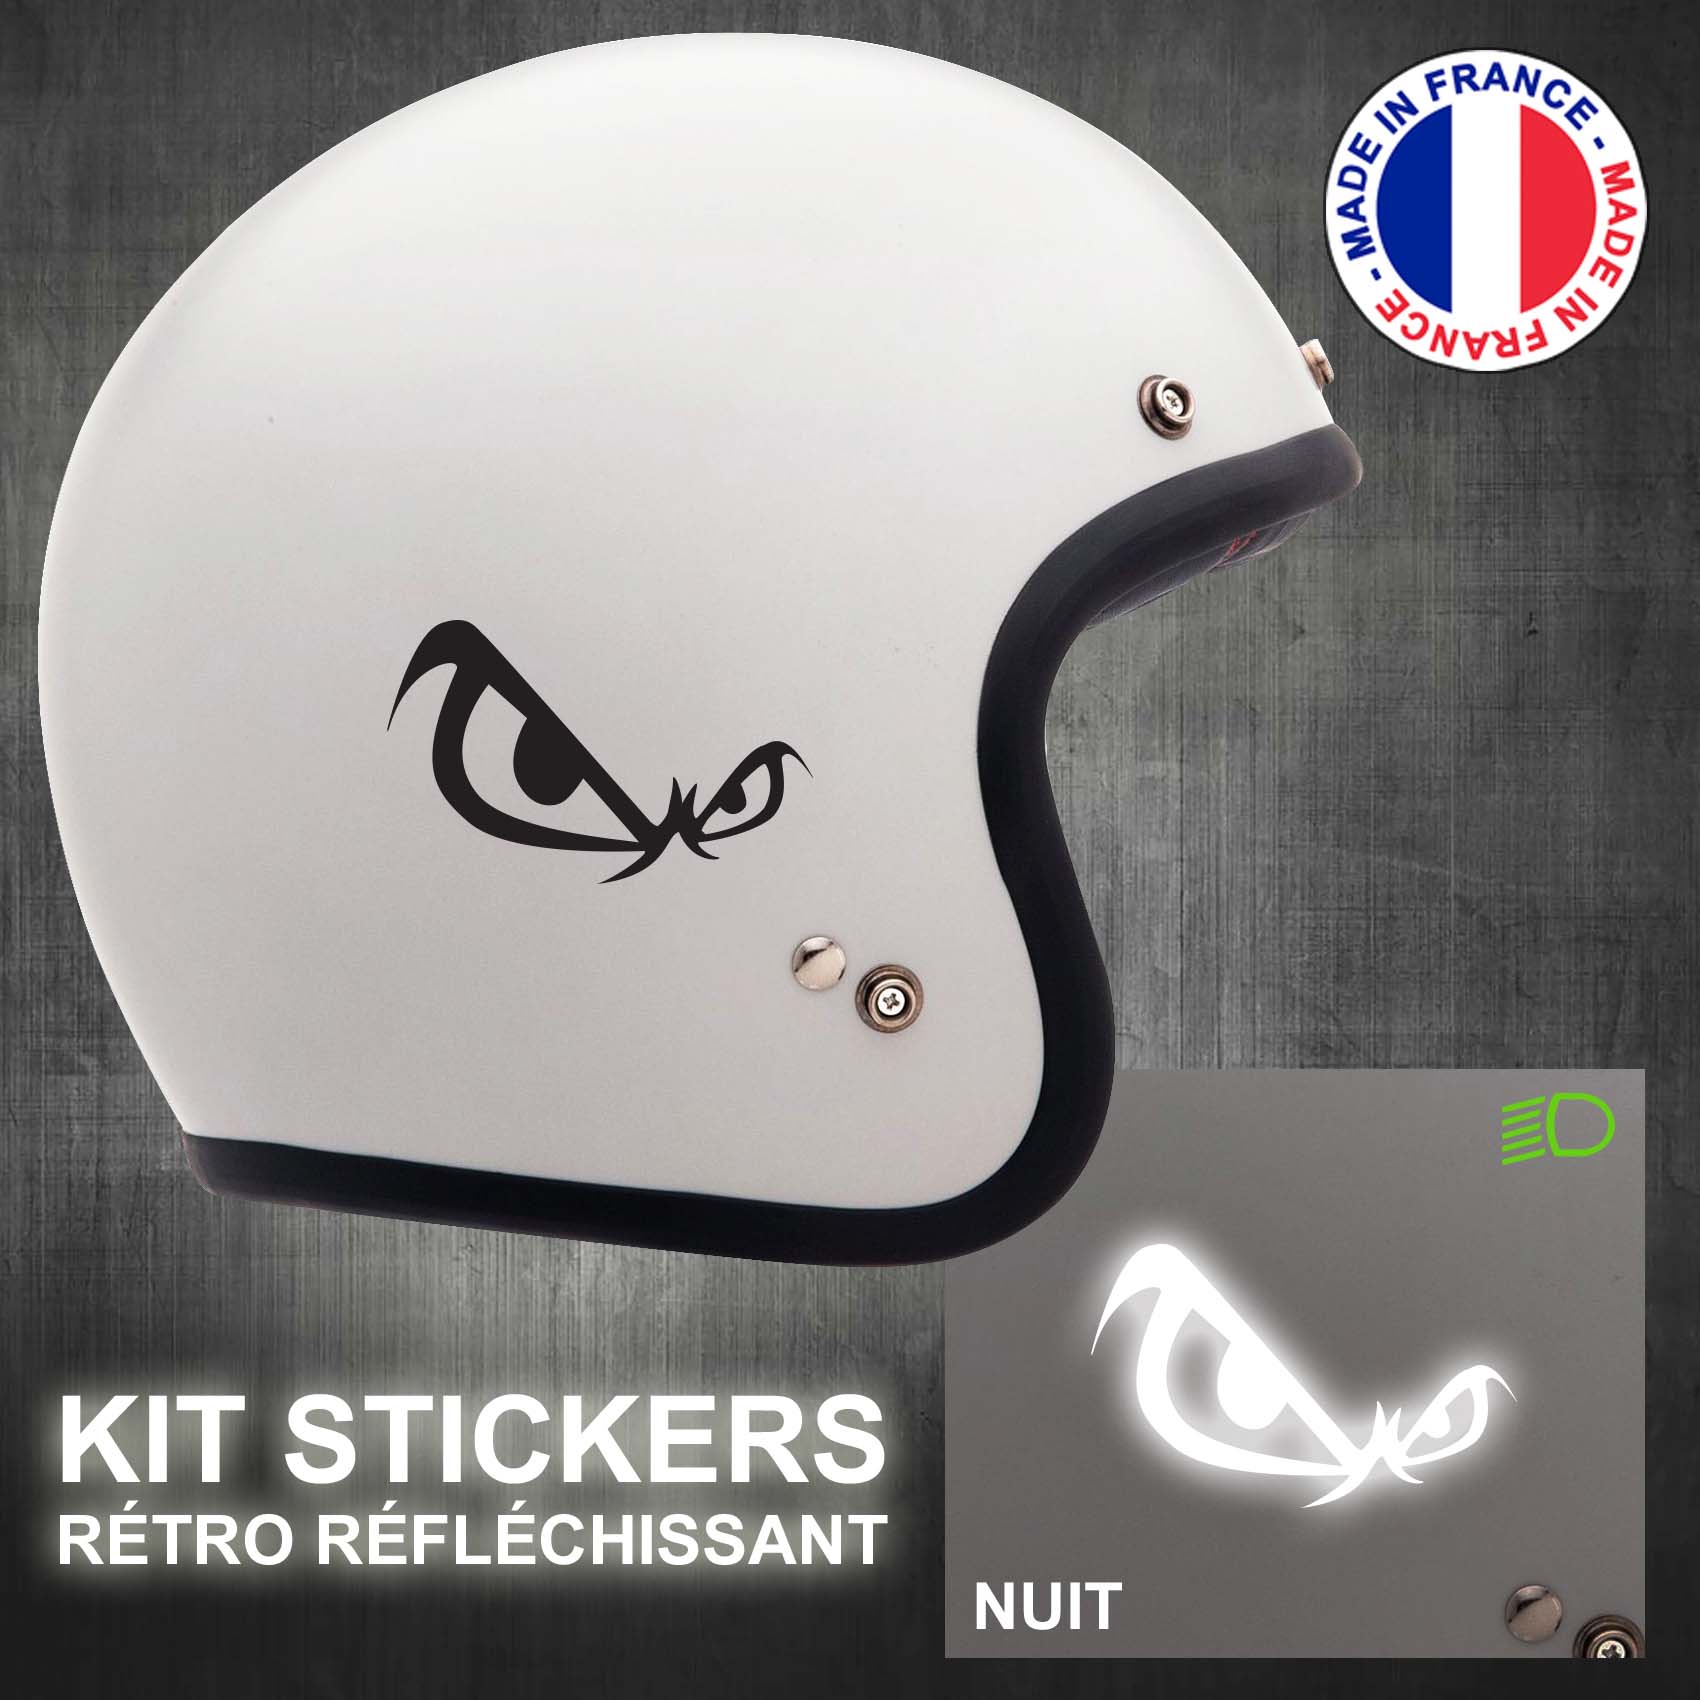 stickers-casque-moto-no-fear-ref1-retro-reflechissant-autocollant-moto-velo-tuning-racing-route-sticker-casques-adhesif-scooter-nuit-securite-decals-personnalise-personnalisable-min